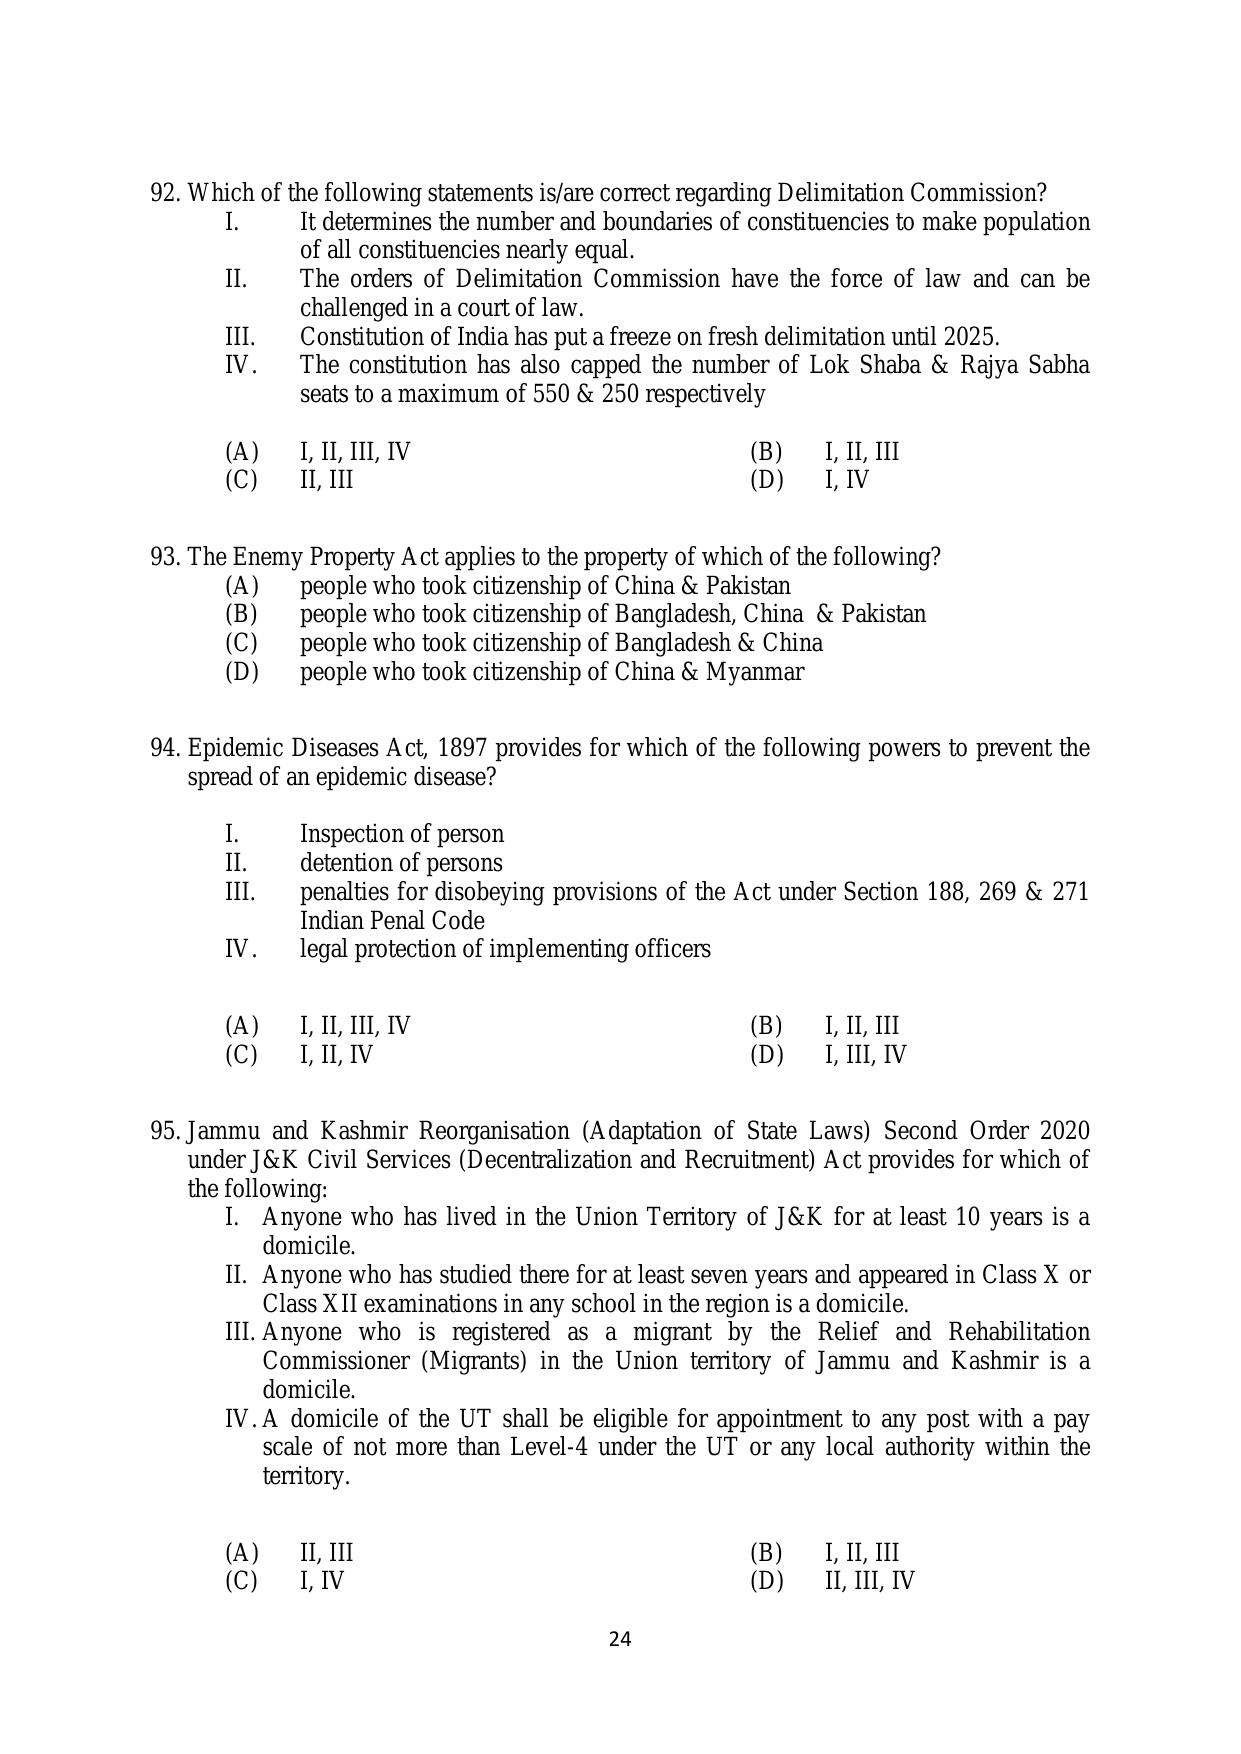 AILET 2020 Question Paper for BA LLB - Page 24